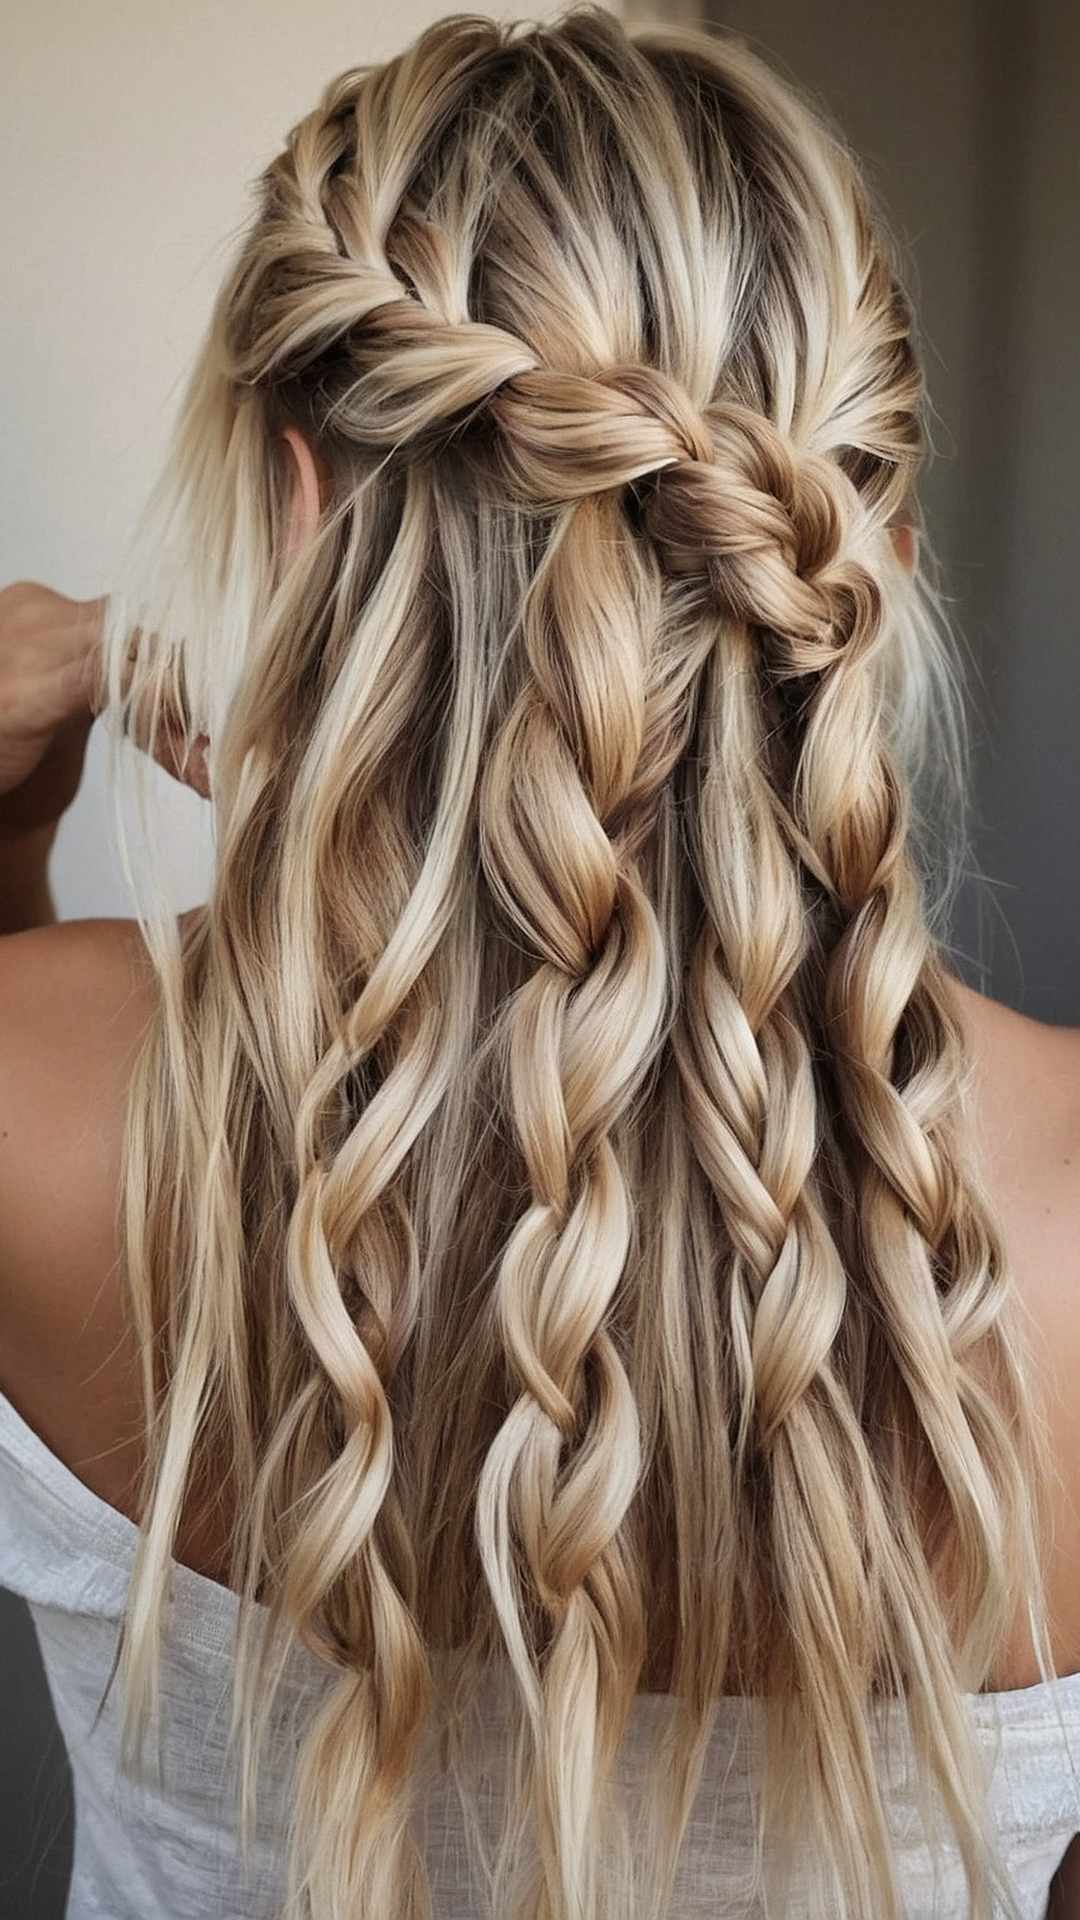 Braided Beauty: Stunning Hairstyle Inspirations